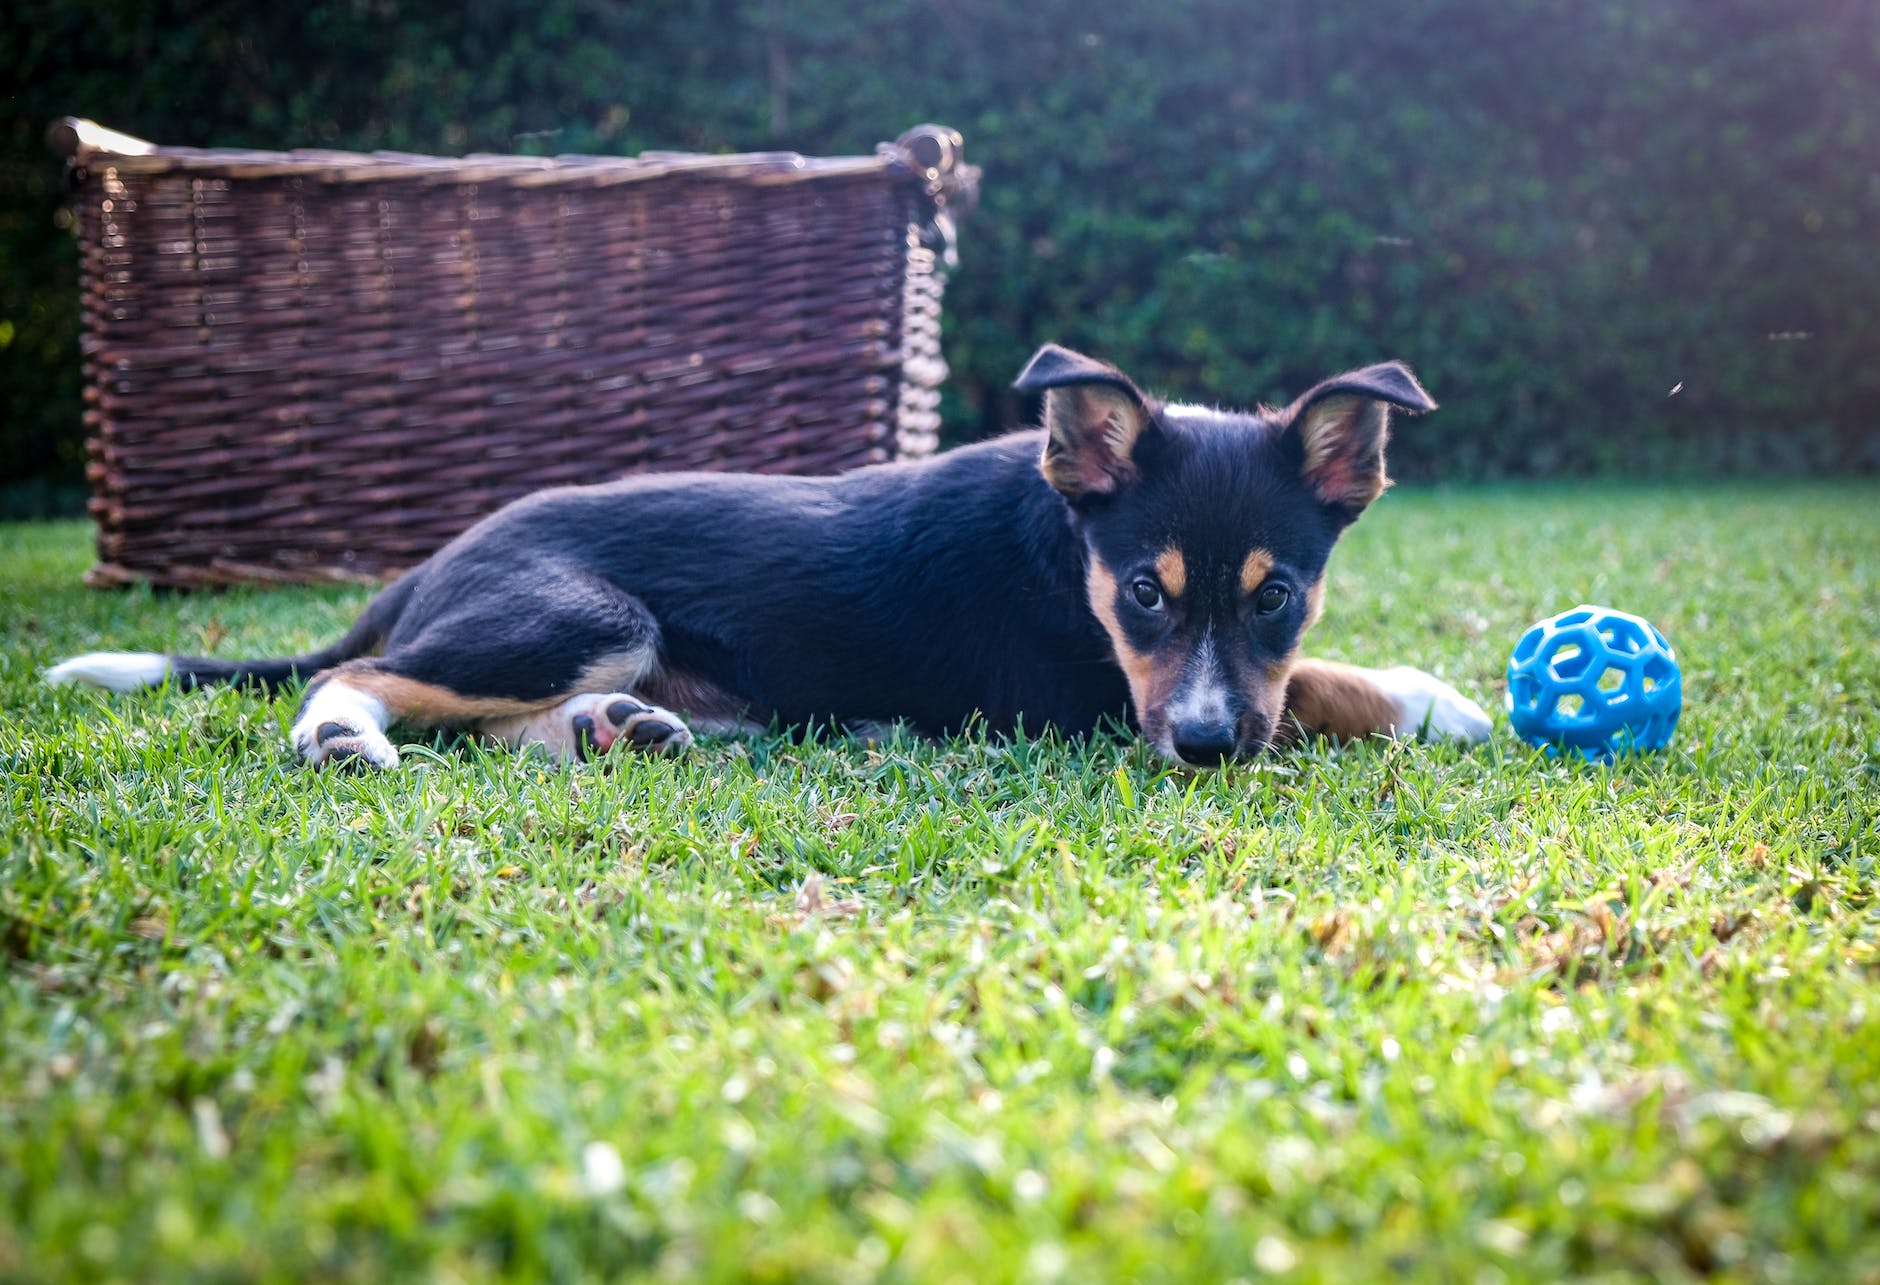 blue ball in front of a dog lying on grass